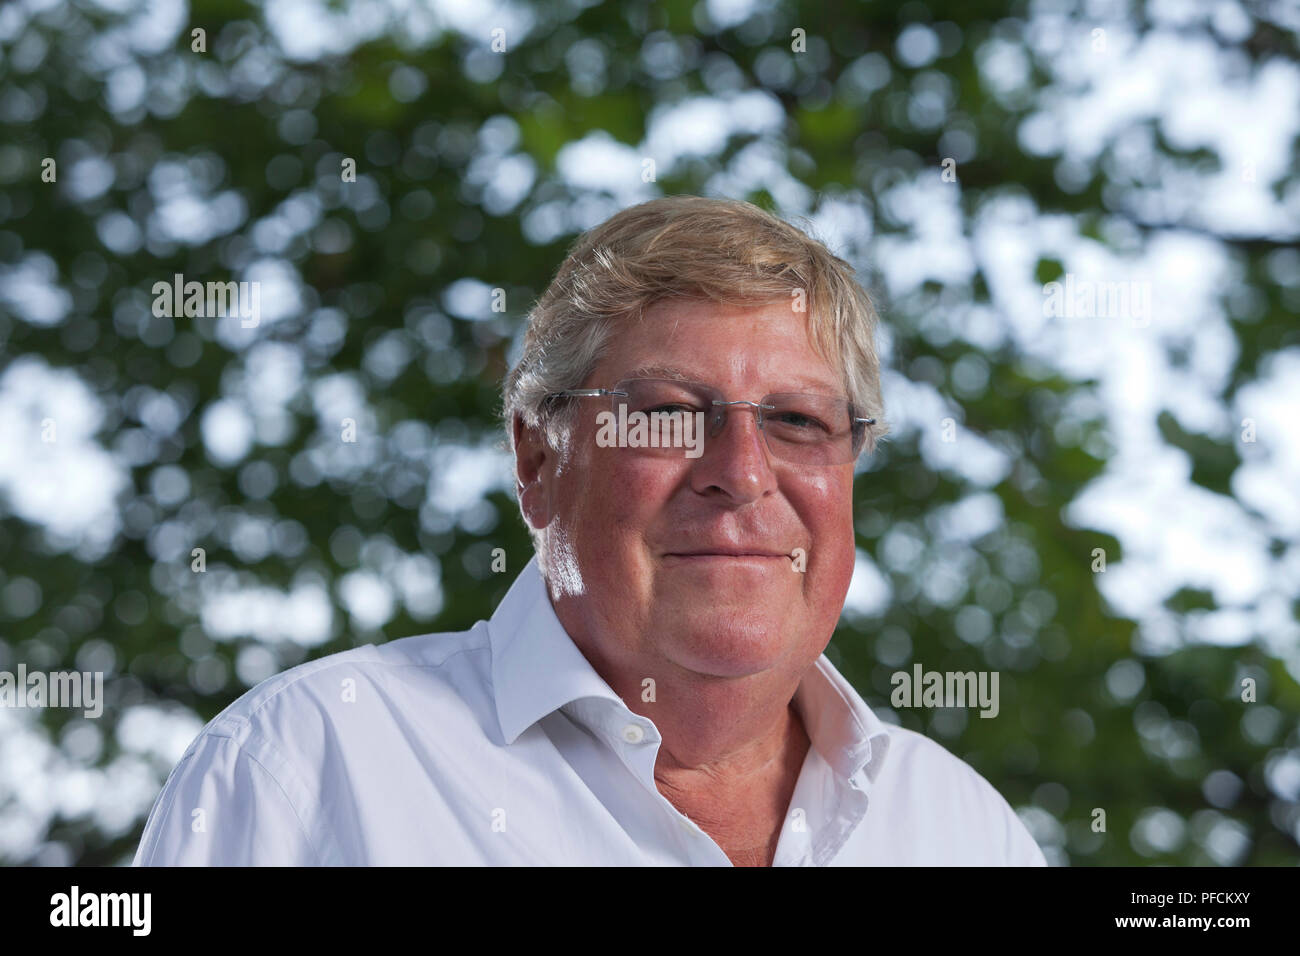 Edinburgh, UK. 21st August, 2018. Edward John Ivo Stourton is a BBC broadcaster and presenter of the BBC Radio 4 programme Sunday, and a frequent contributor to the Today programme, where for ten years he was one of the main presenters. Pictured at the Edinburgh International Book Festival. Edinburgh, Scotland.  Picture by Gary Doak / Alamy Live News Stock Photo